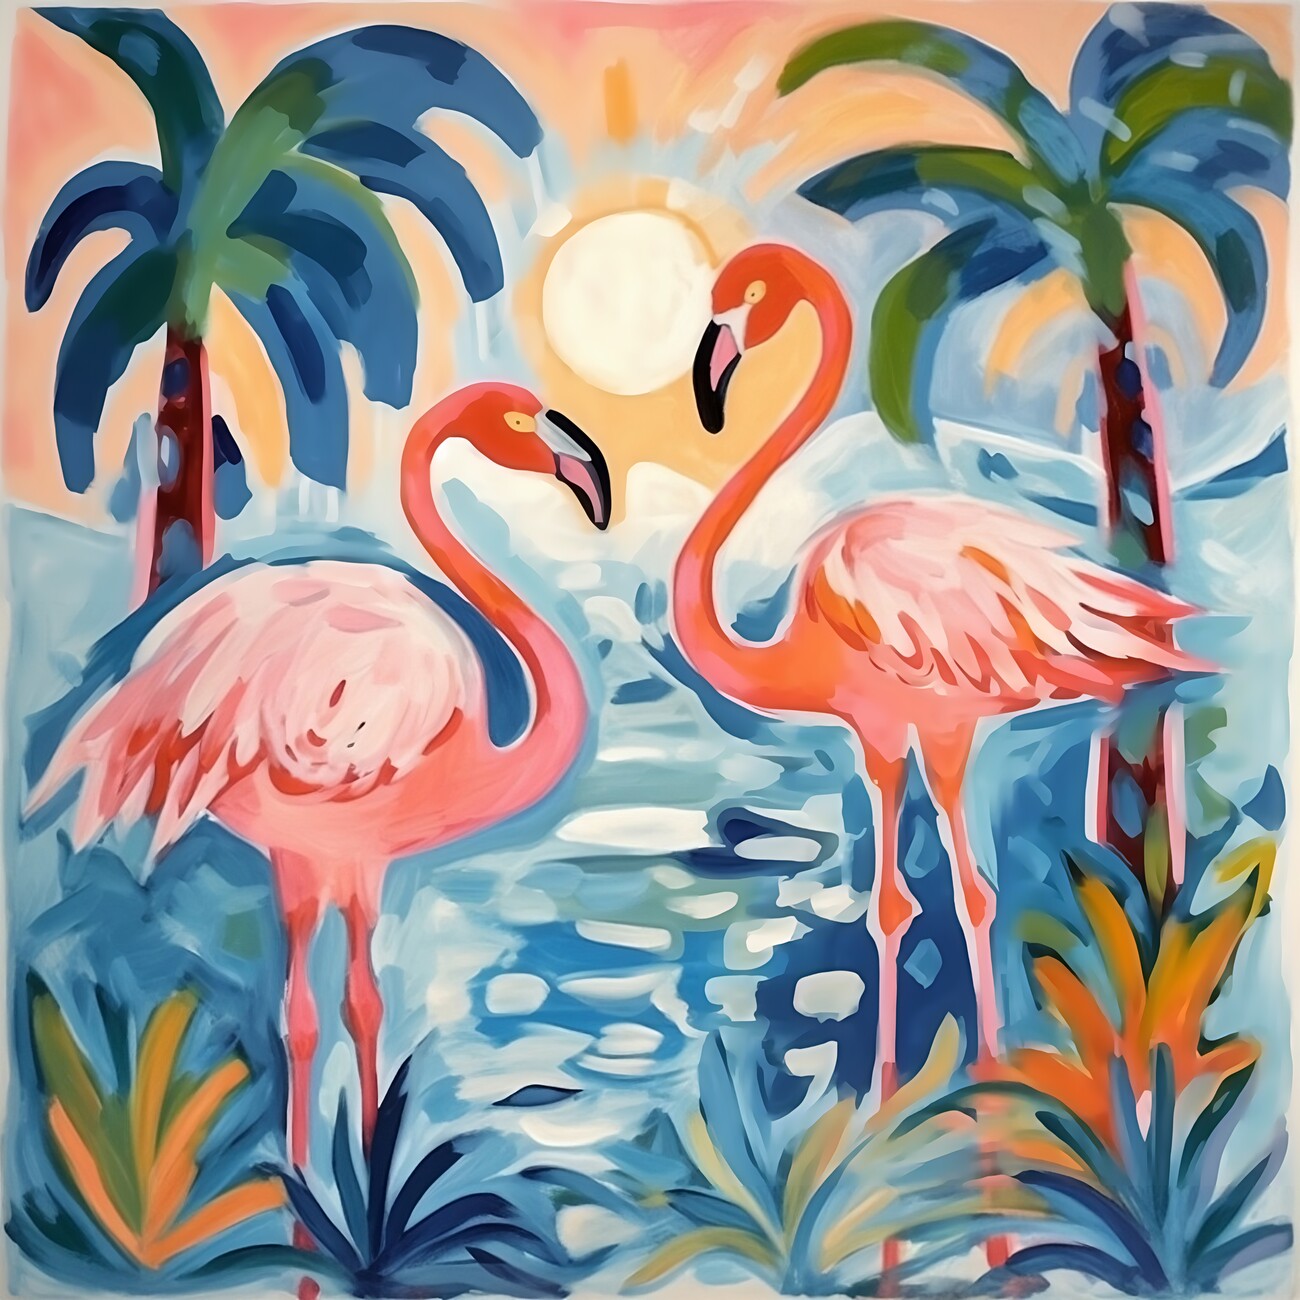 Illustrazione artistiche, two cute pink flamingos under palm trees by the  beach